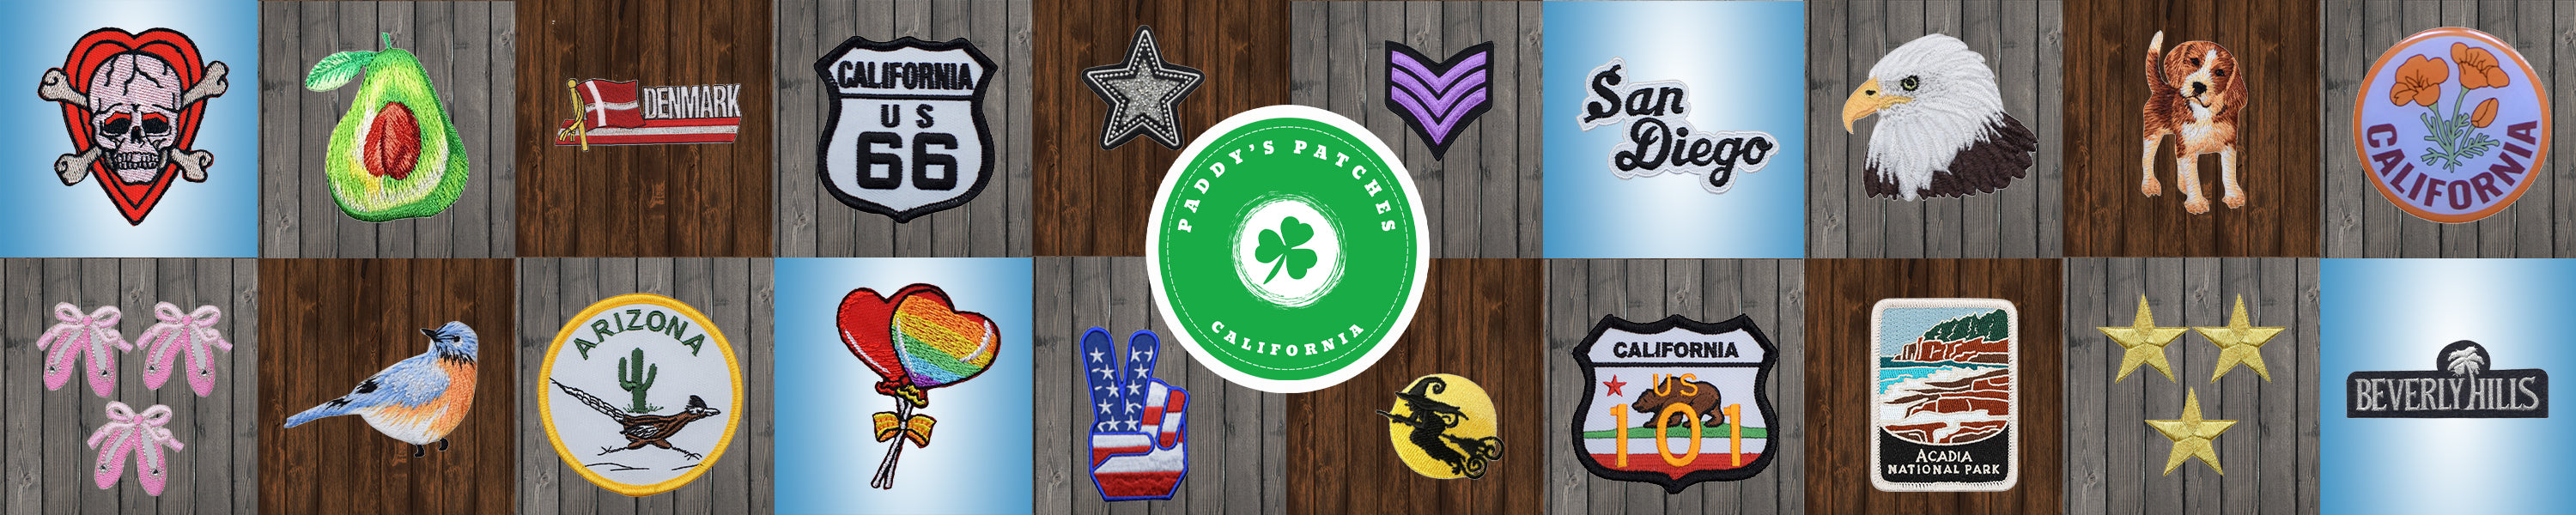 Paddy's Patches Homepage Patch Collage Banner2